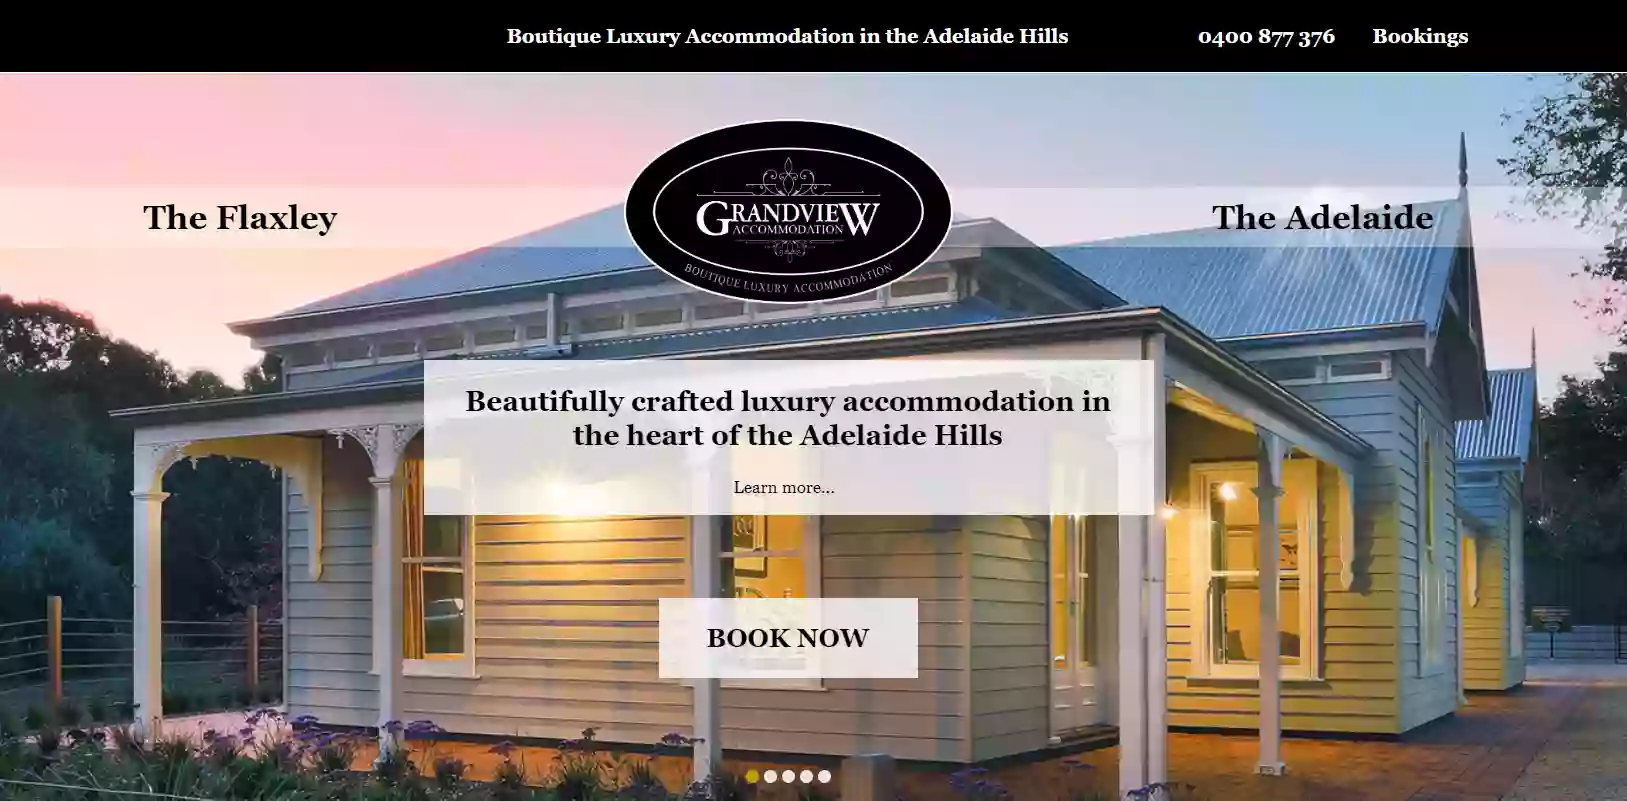 Grandview Accommodation - The Elm Tree Apartments